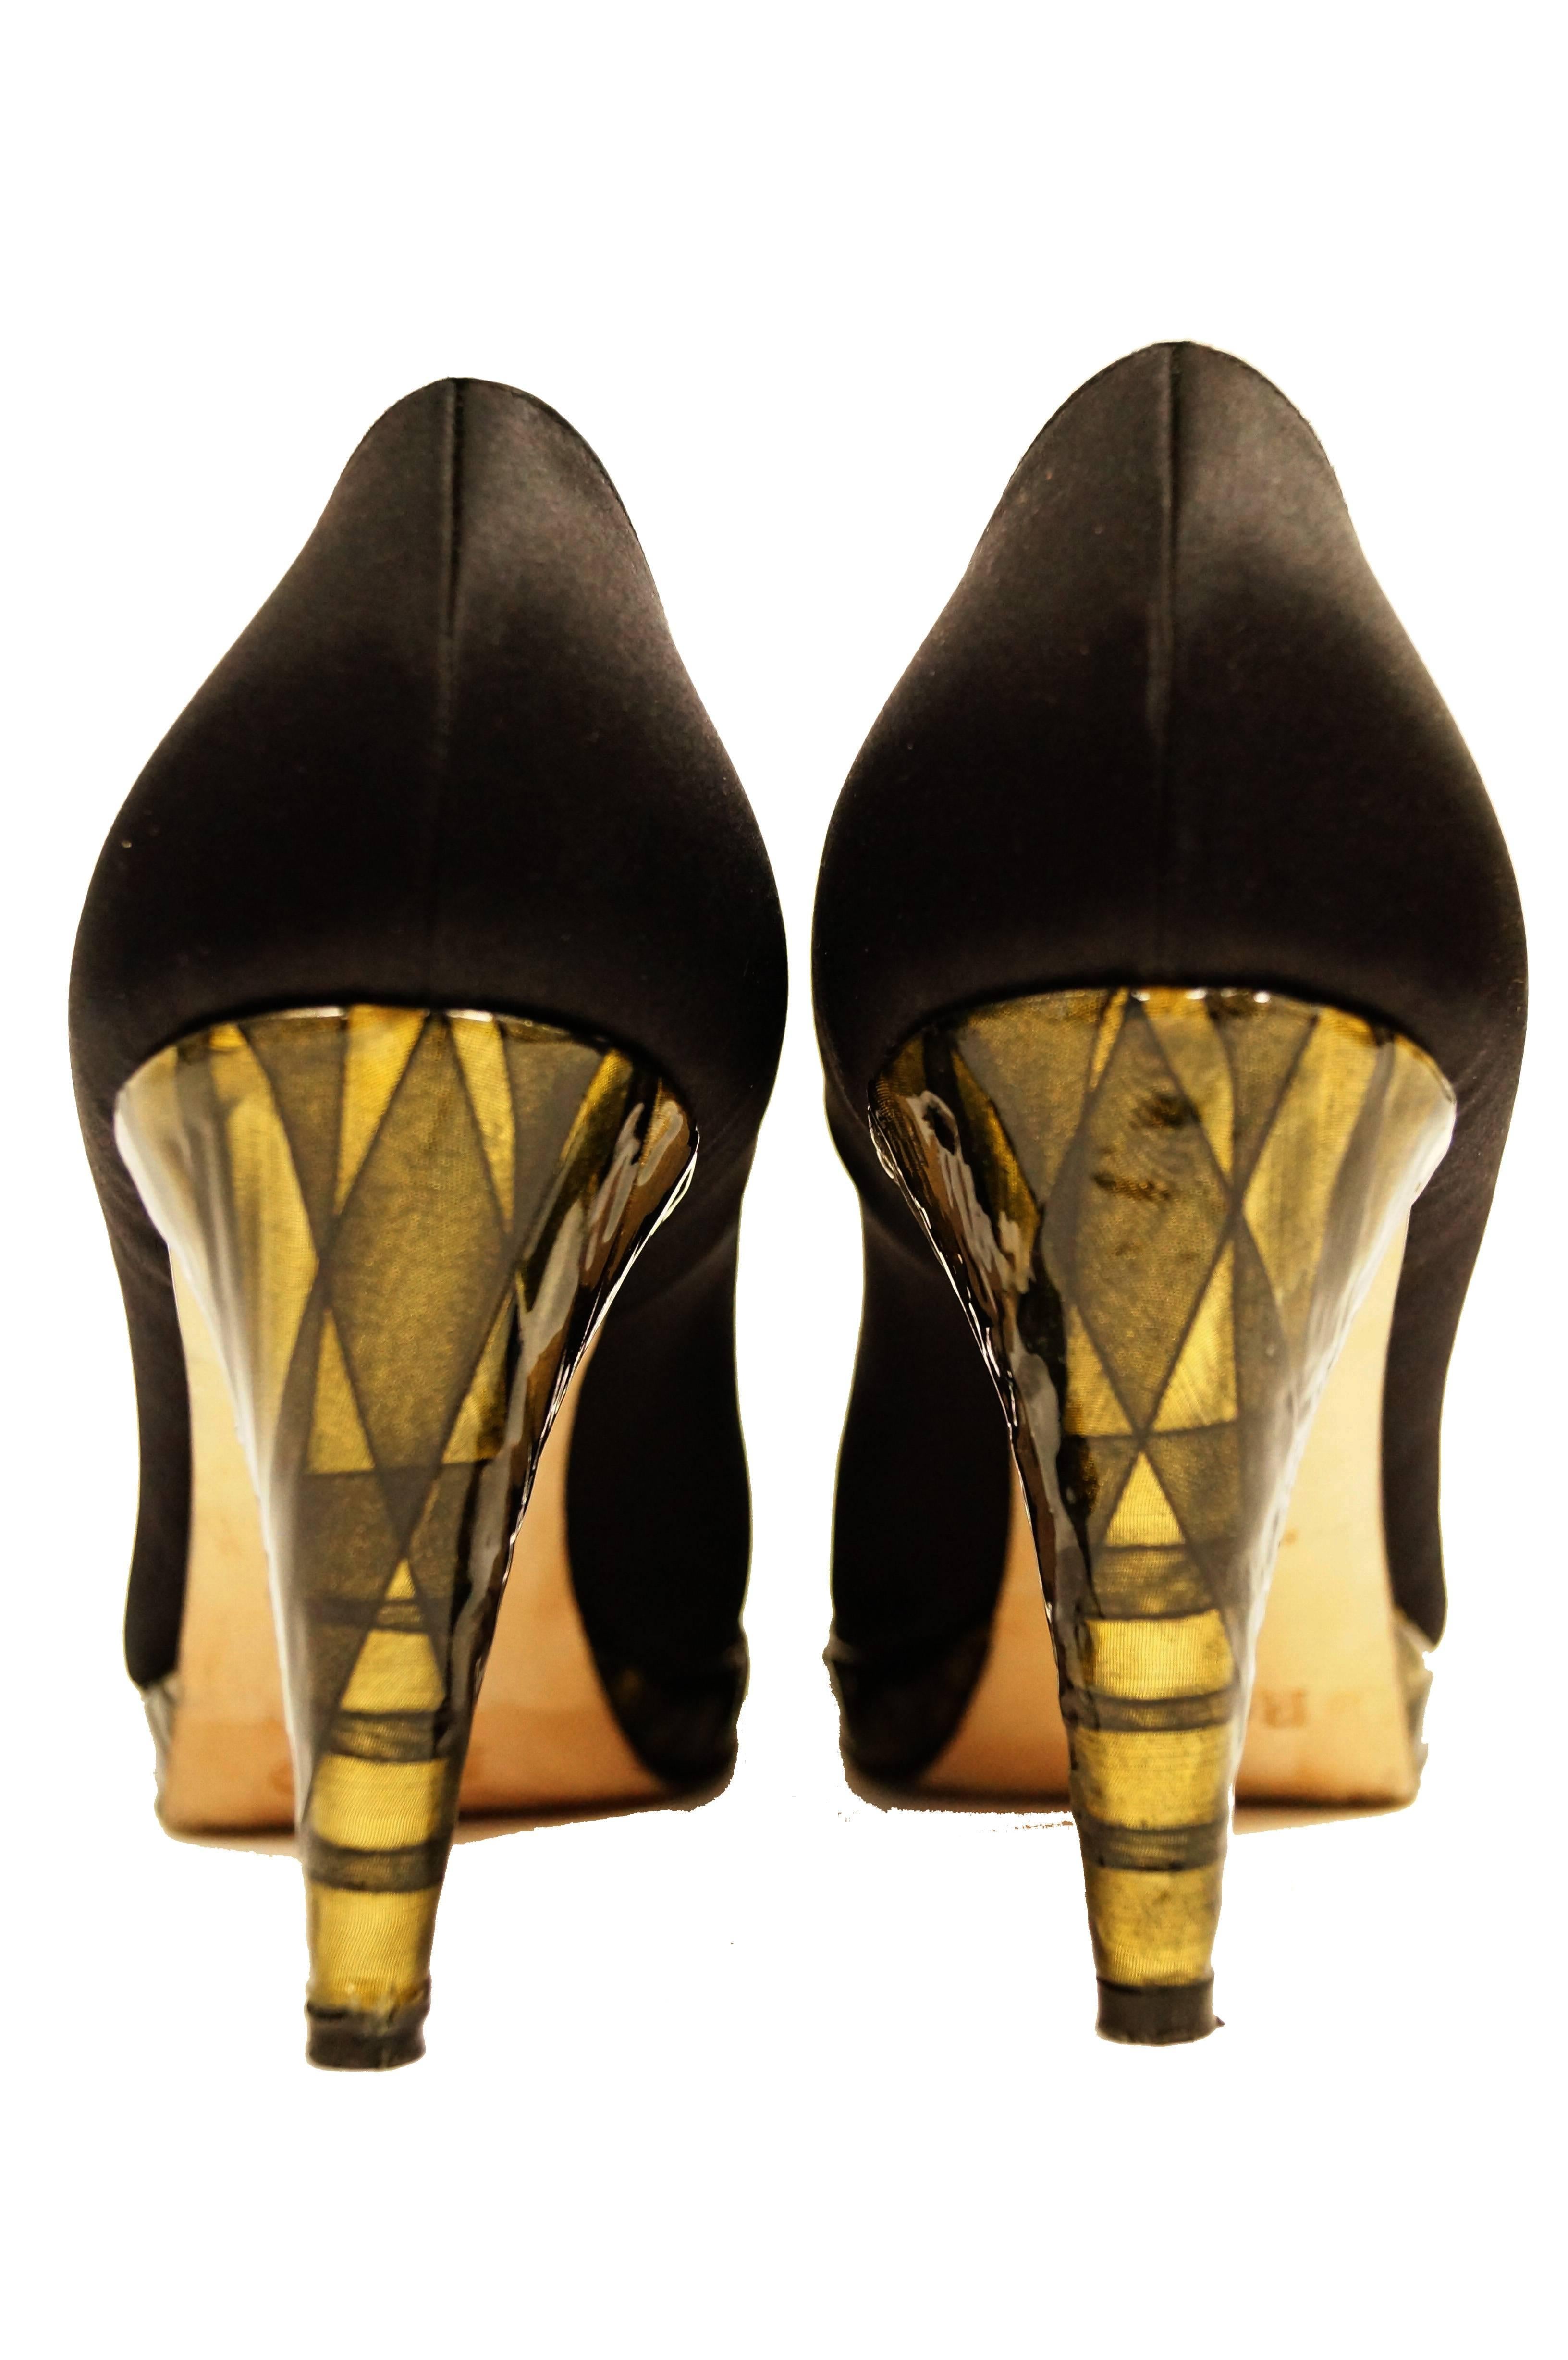 Fabulous black satin and gold pumps by Rodo!  Extremely hard to purchase on the second dary market as most remain coveted by their original owners.  Pumps feature traditional mid level vamp with high ankle, contrasting with avant-garde gold base